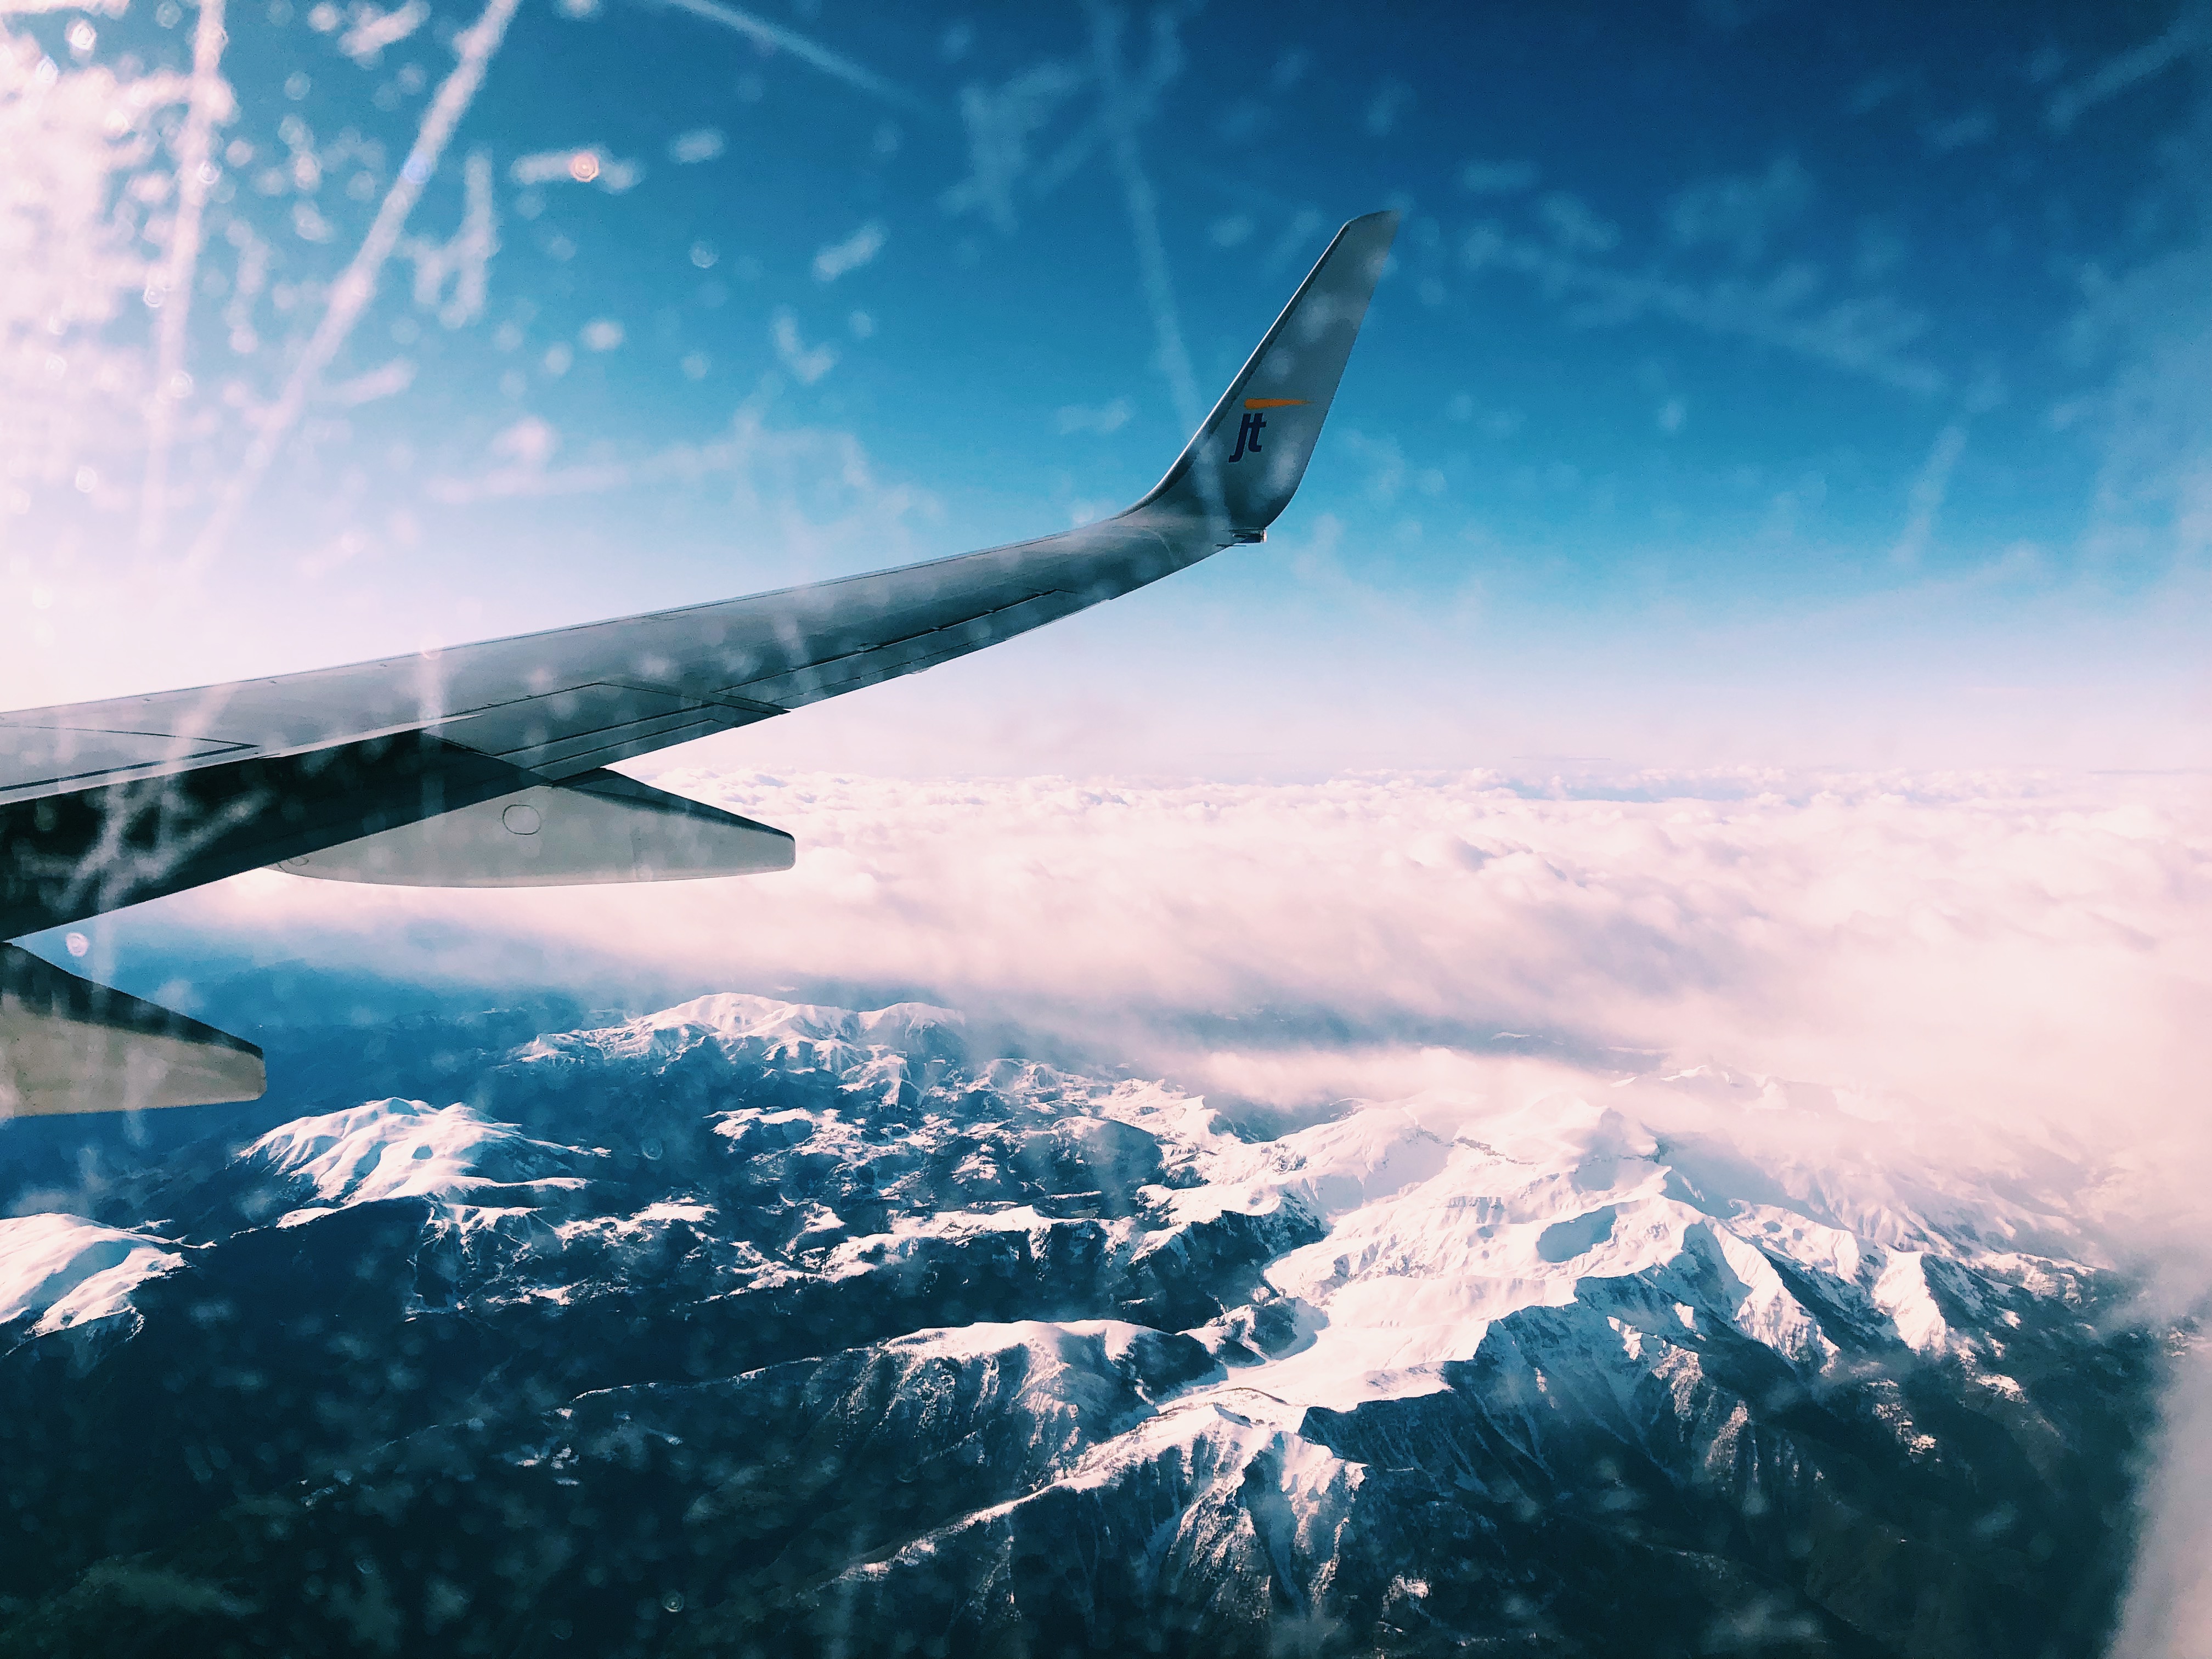 Picture taken through plane window showing the wing of the plane and the snow-covered French Alps